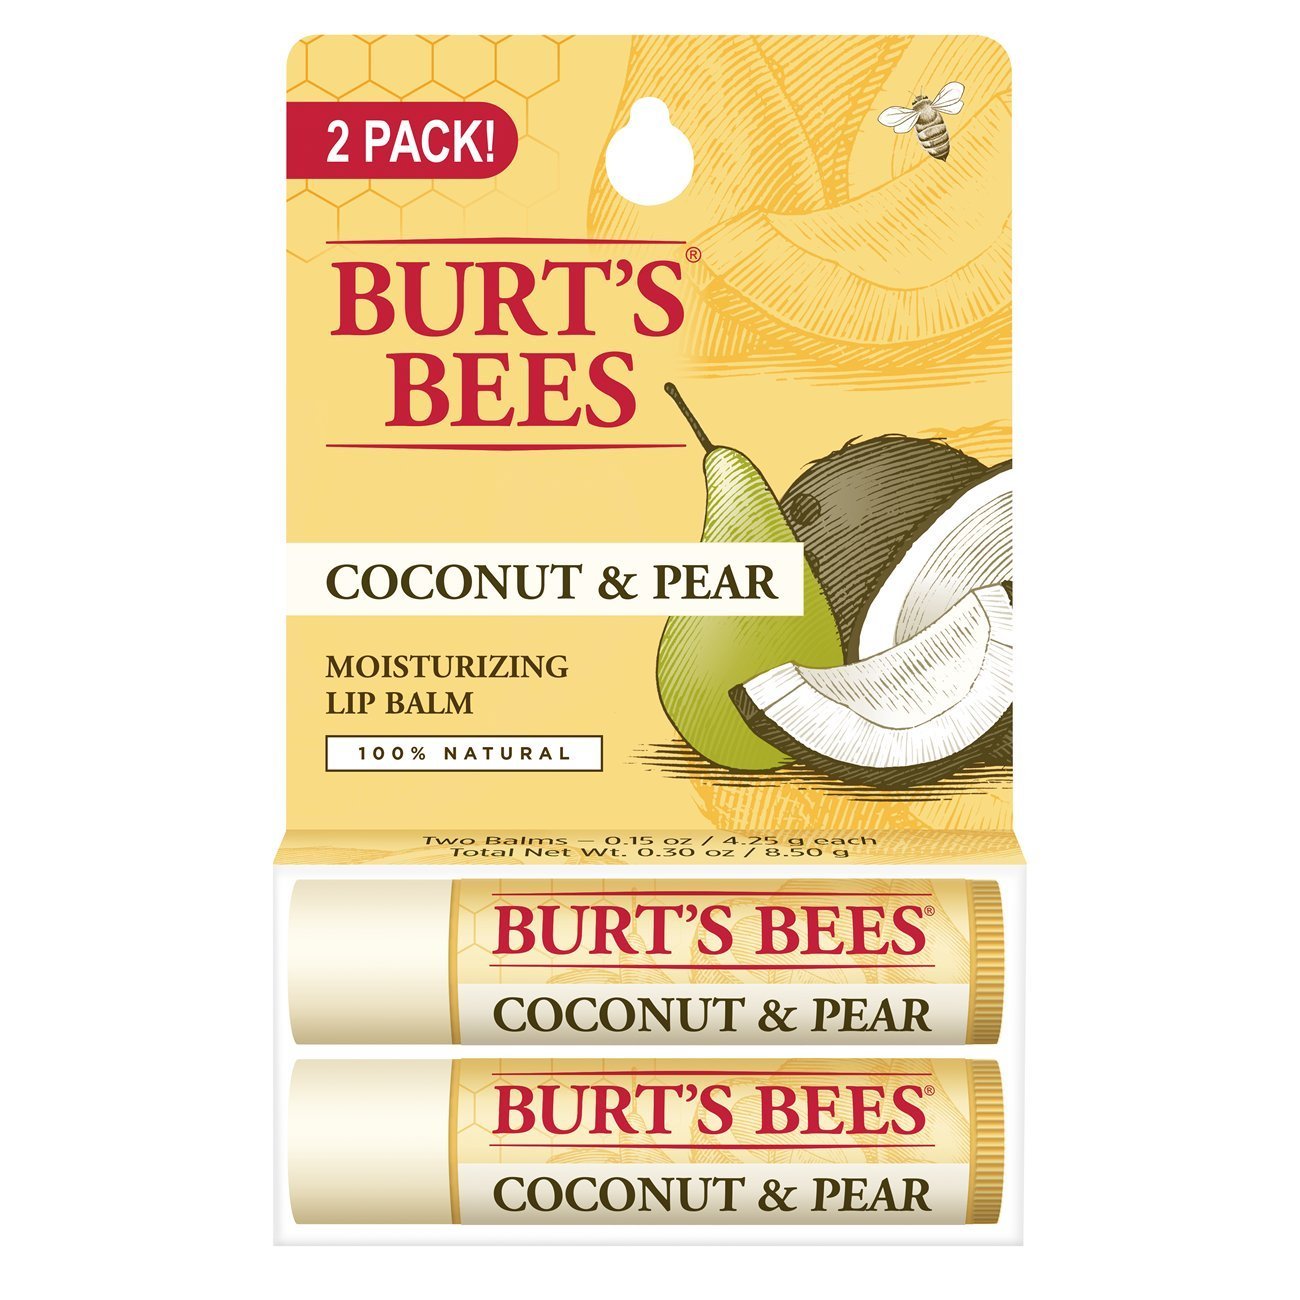 Burt’s Bees 100% Natural Moisturizing Lip Balm (Coconut & Pear) 2 Pack Only $3.70 Shipped!